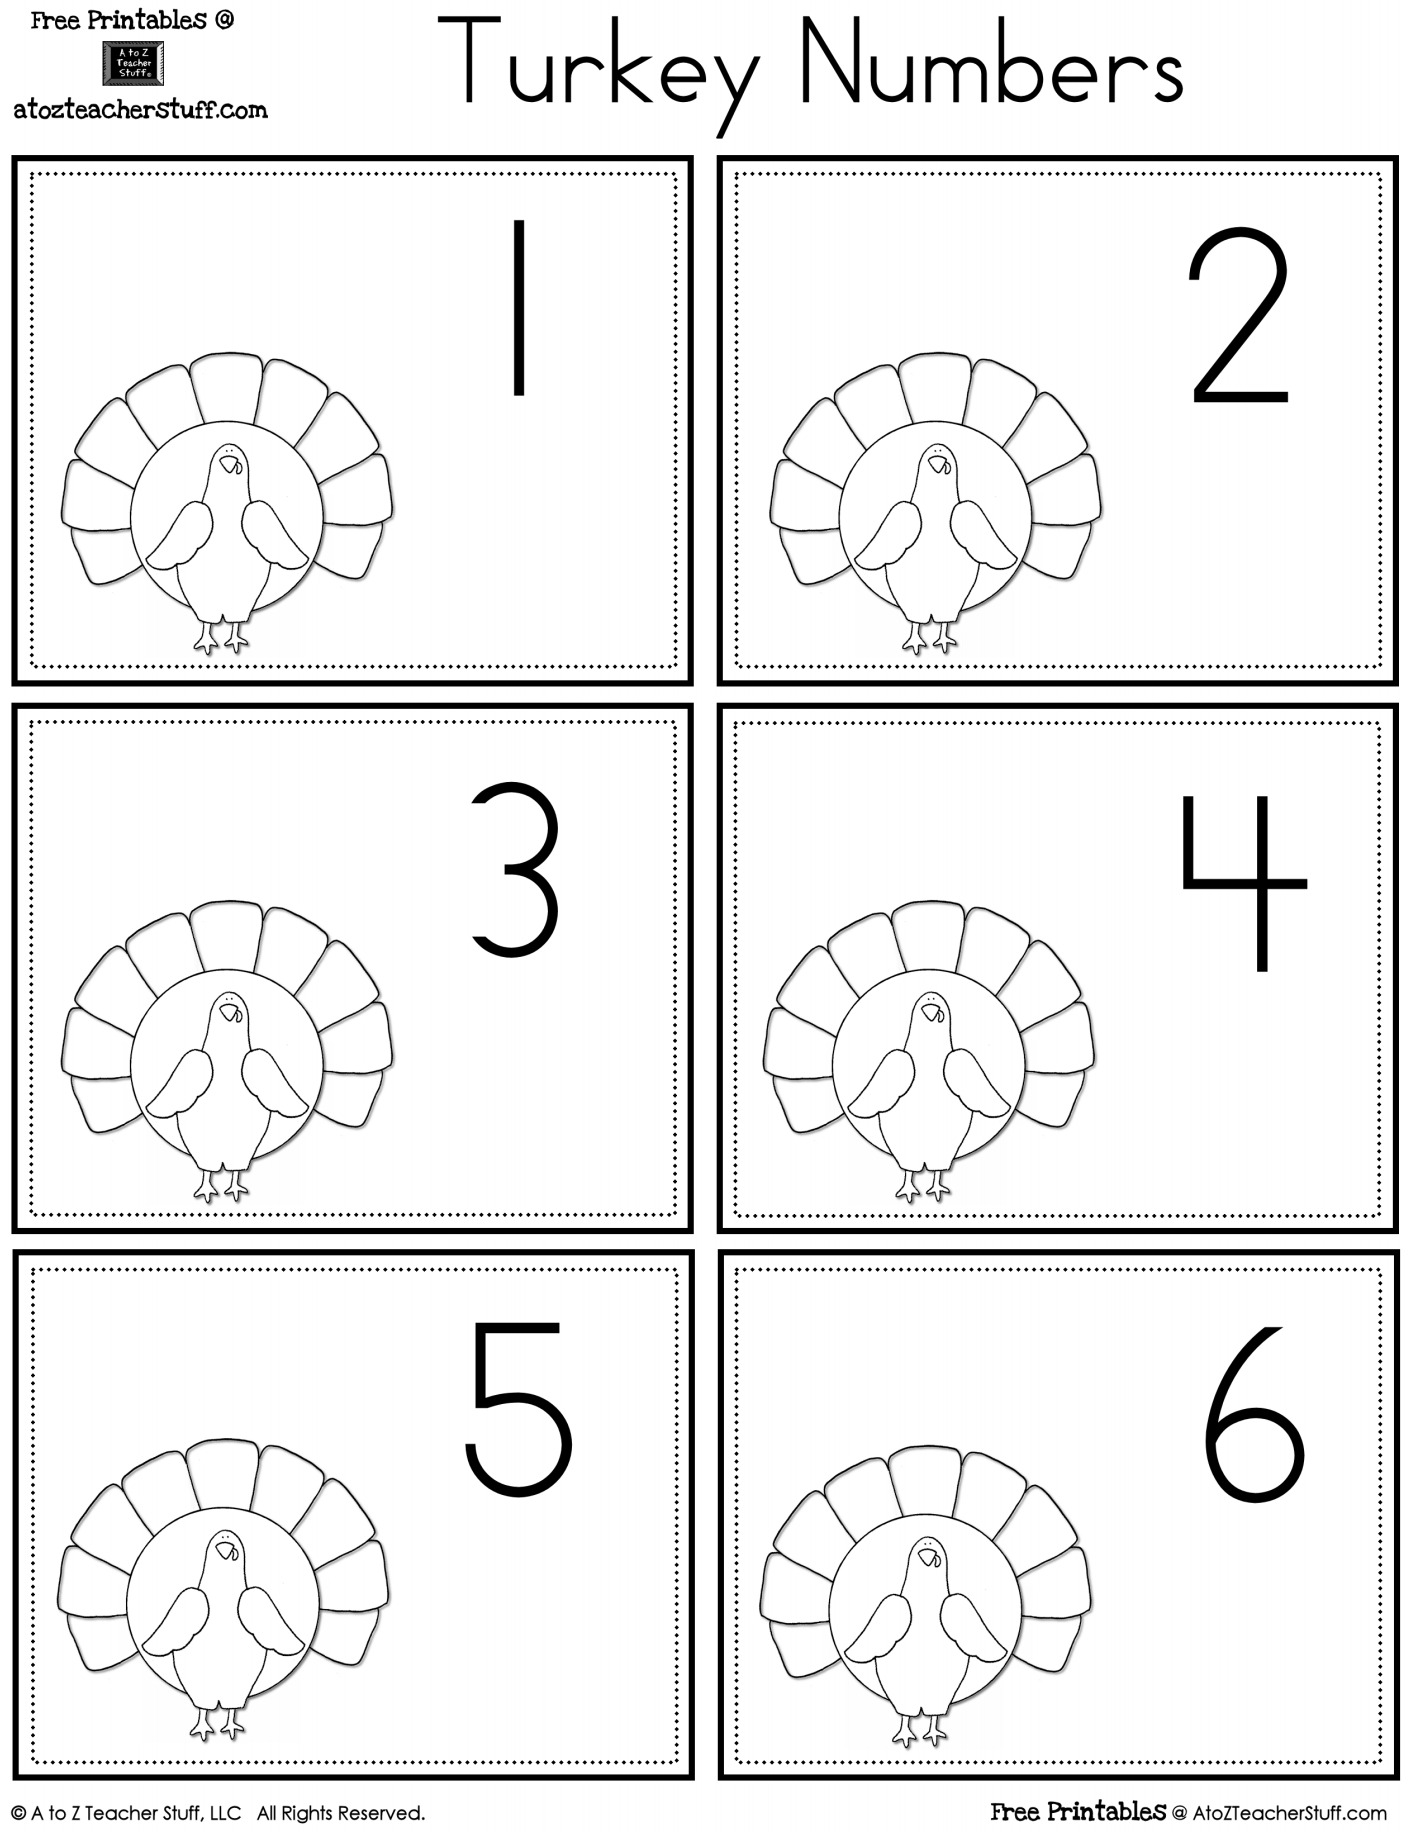 Turkey Number Cards | A To Z Teacher Stuff Printable Pages